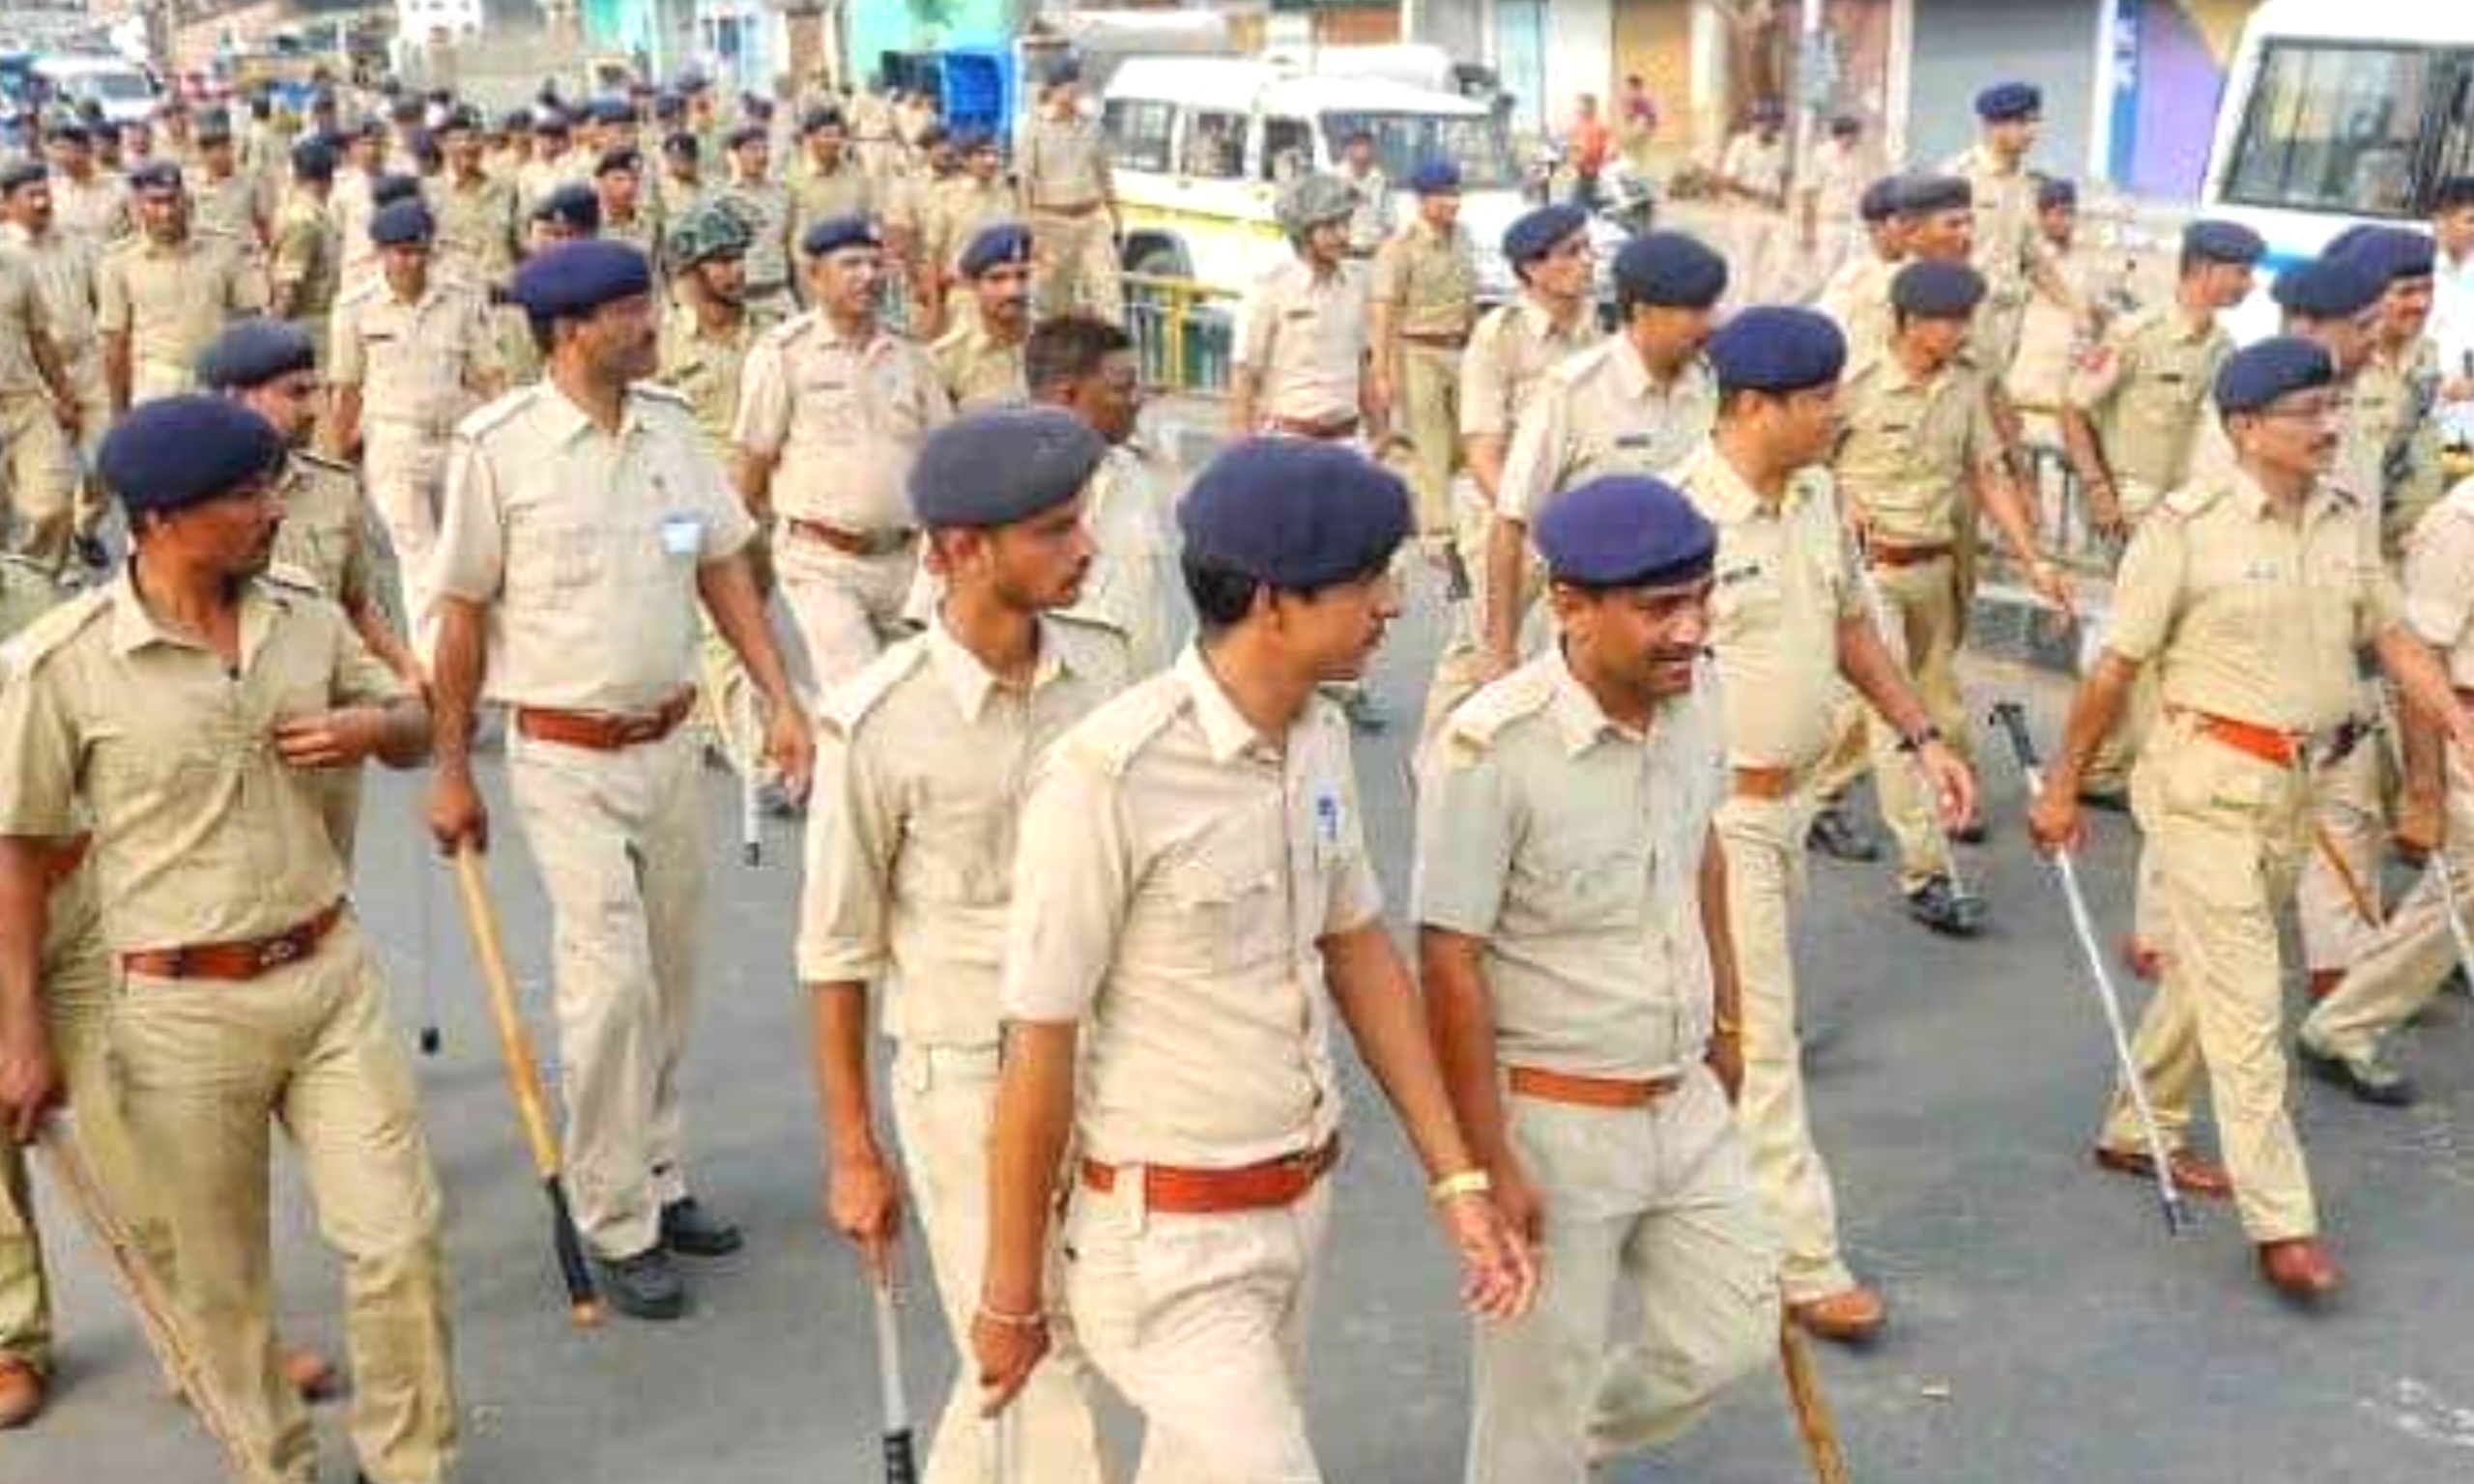 West Bengal Police Recruitment